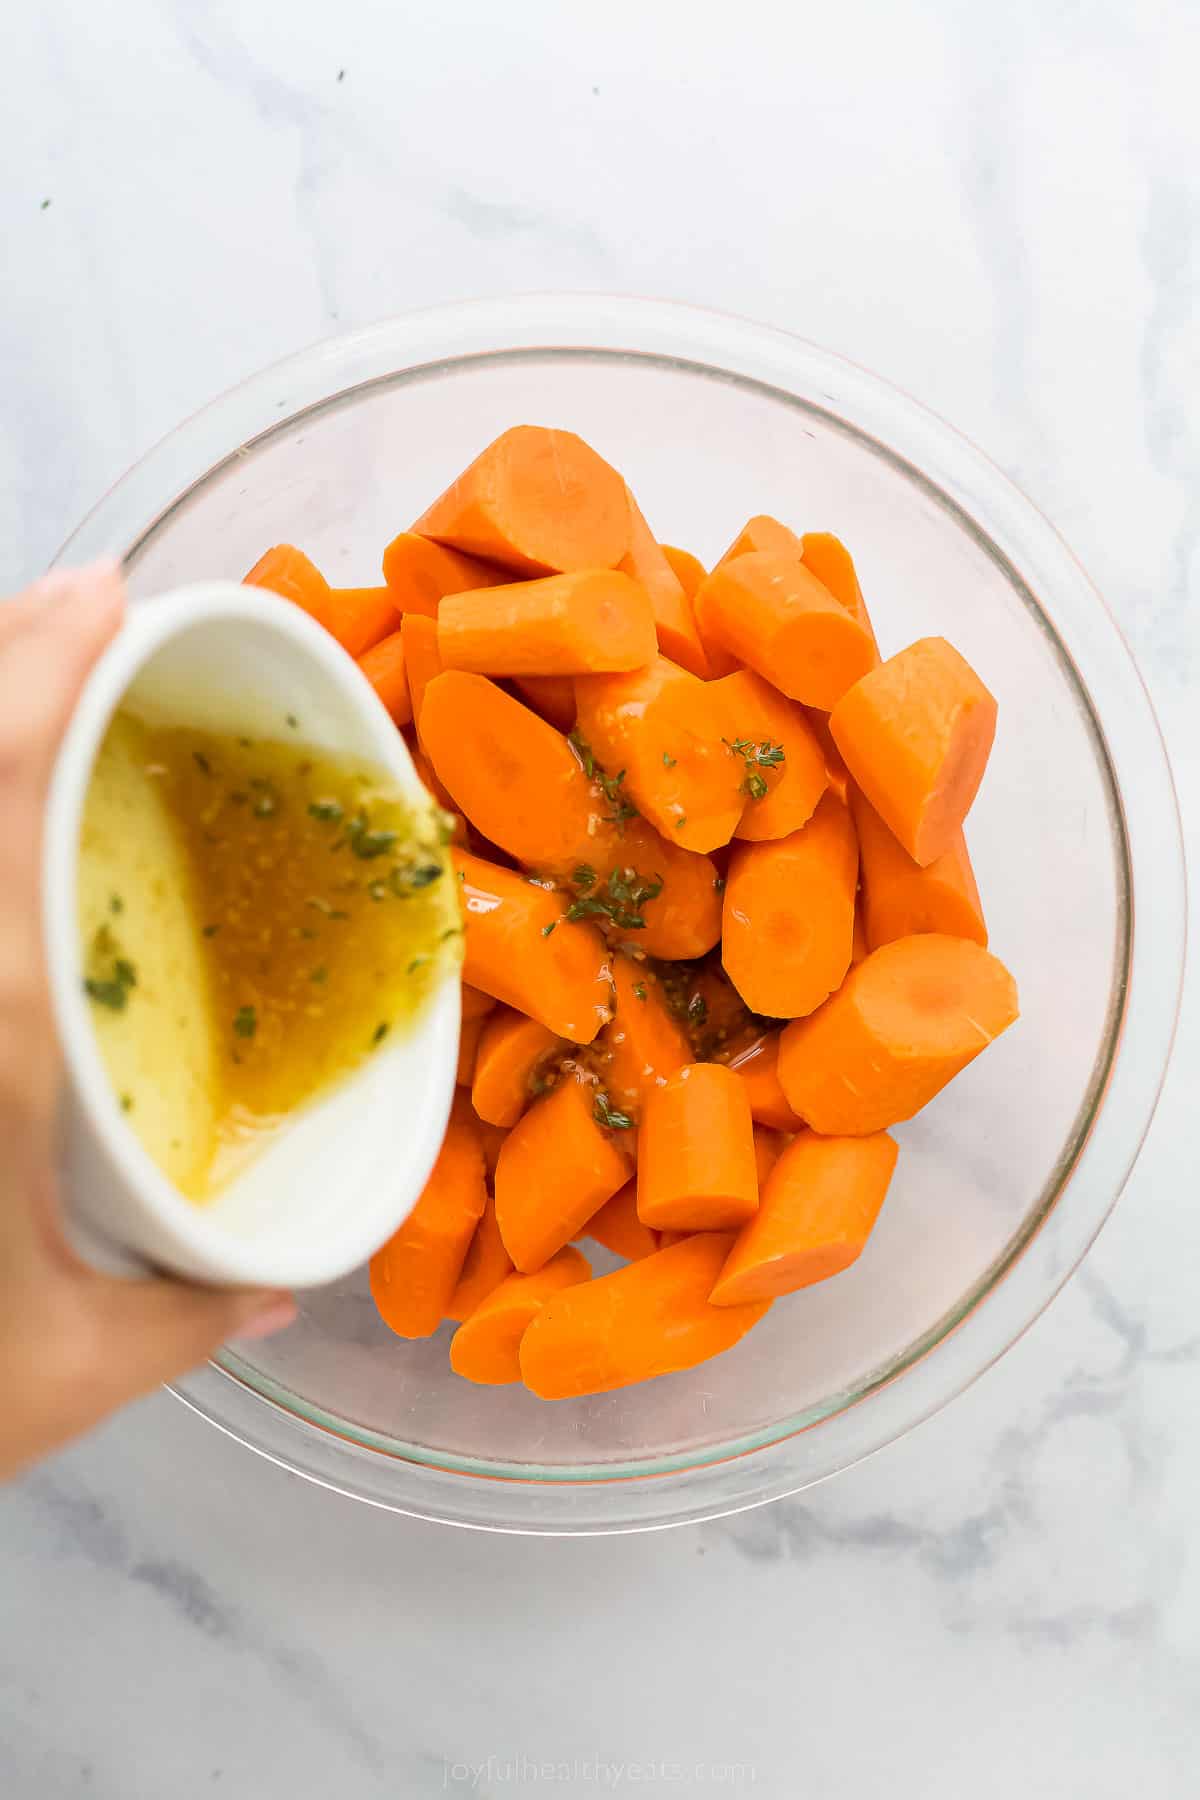 pouring an olive oil mixture over a bowl of cut up carrots